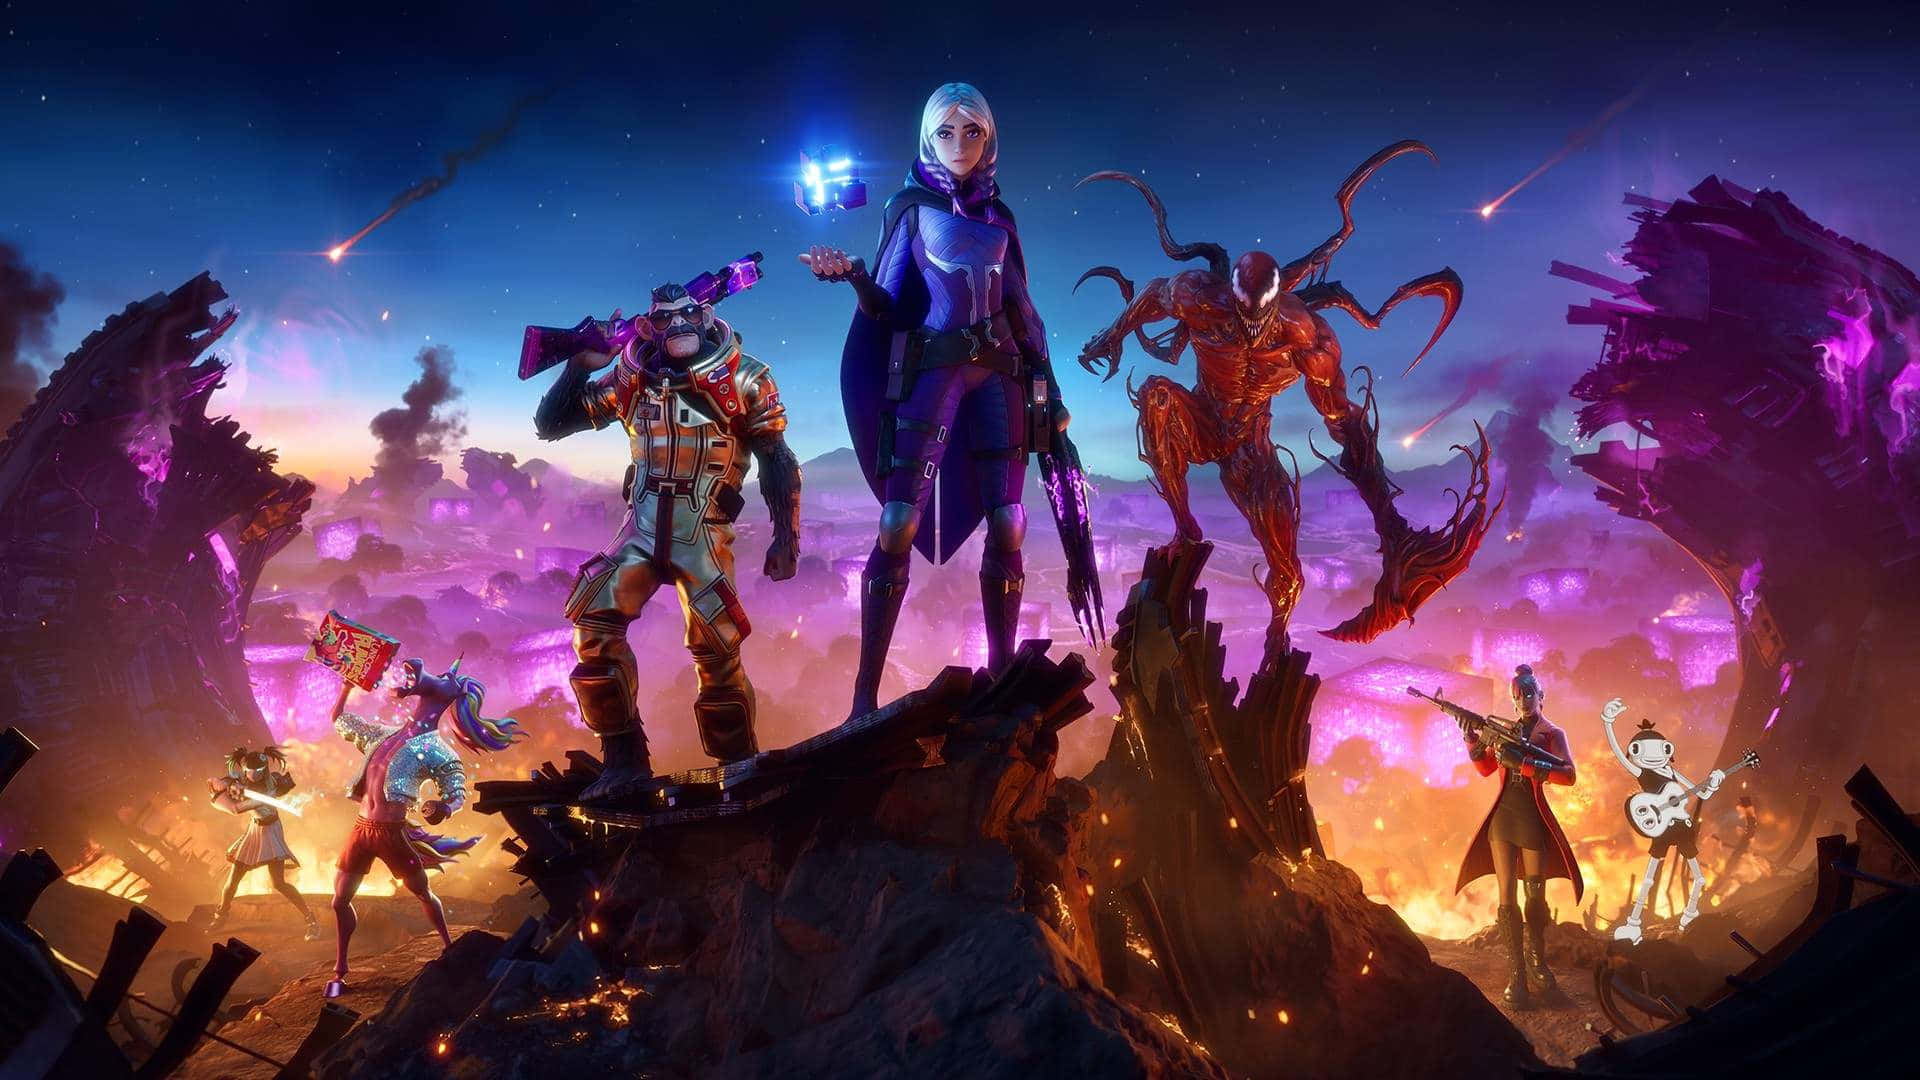 Take your gaming to the next level with the new Fortnite Season 4 Chapter 2! Wallpaper